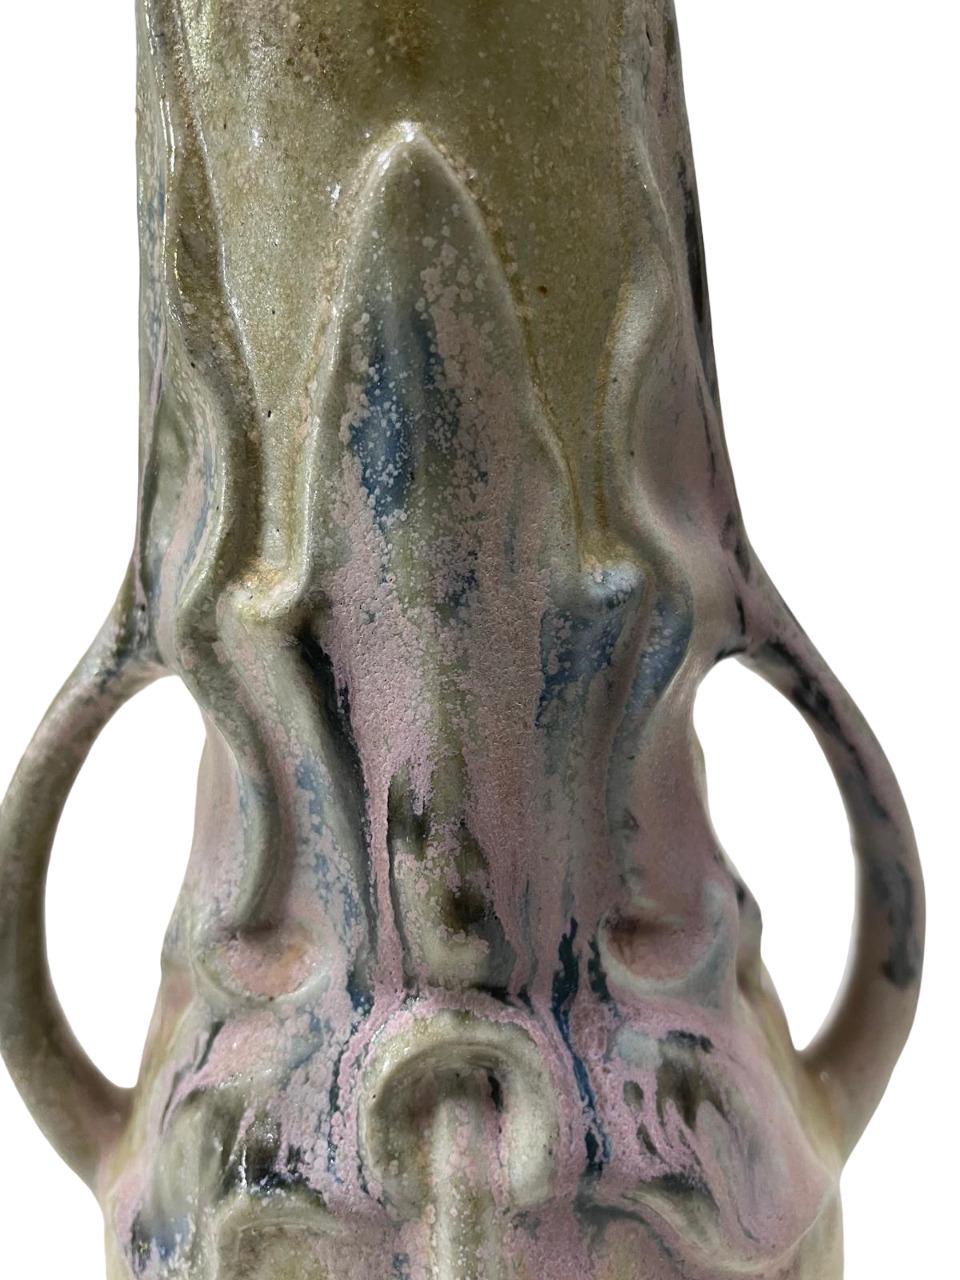 Late 19th Century ART NOUVEAU two-handled GREBER Vase, with some pink flashes, refined ceramic For Sale